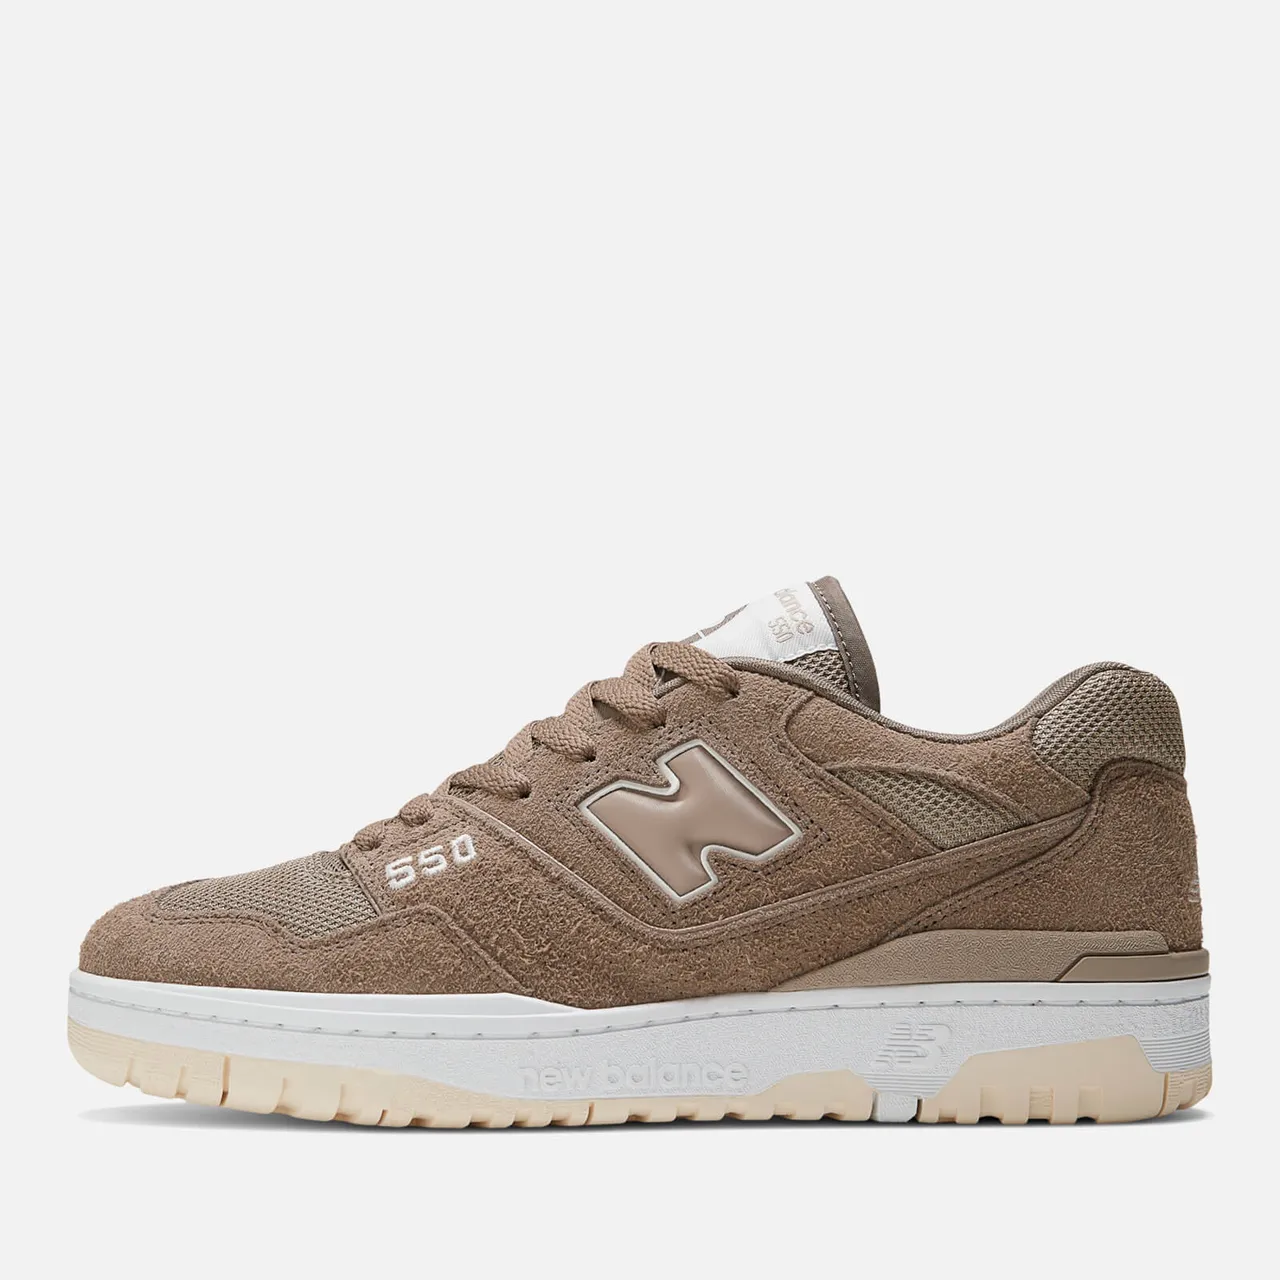 New Balance 550 Suede and Mesh Trainers - UK